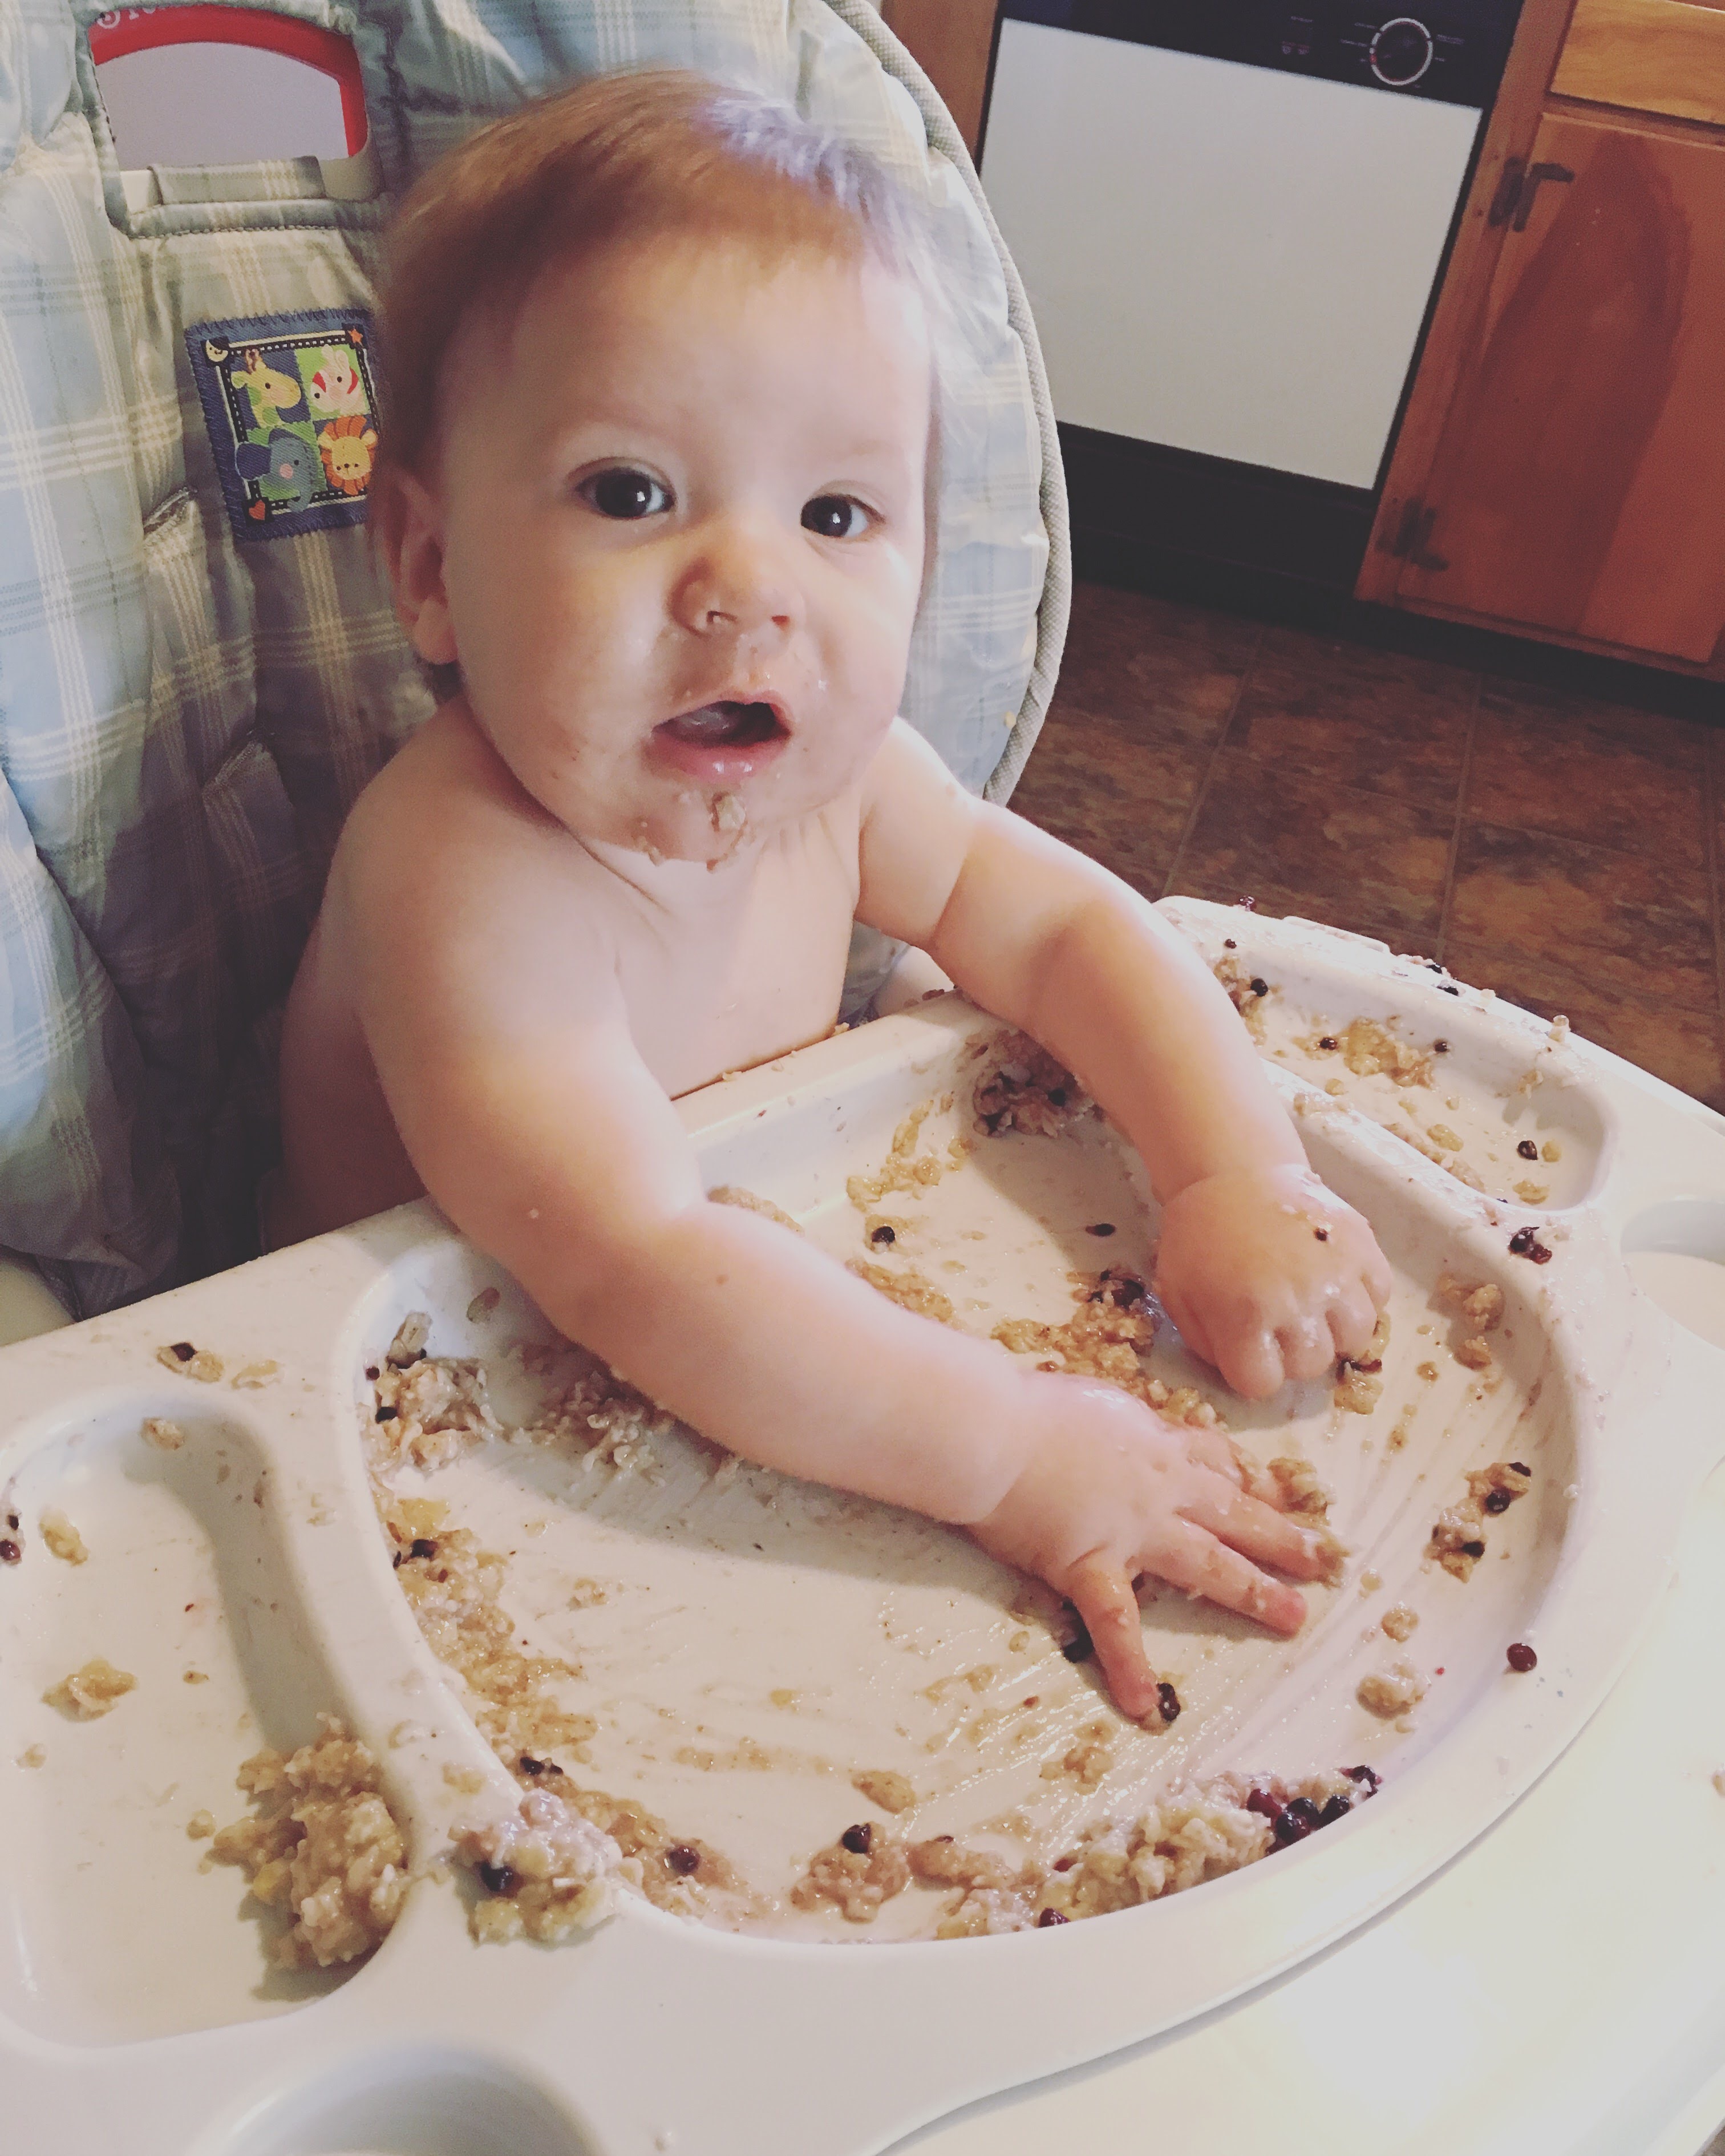 Now at almost 10 months he eats amazingly and loves all sorts of different foods!